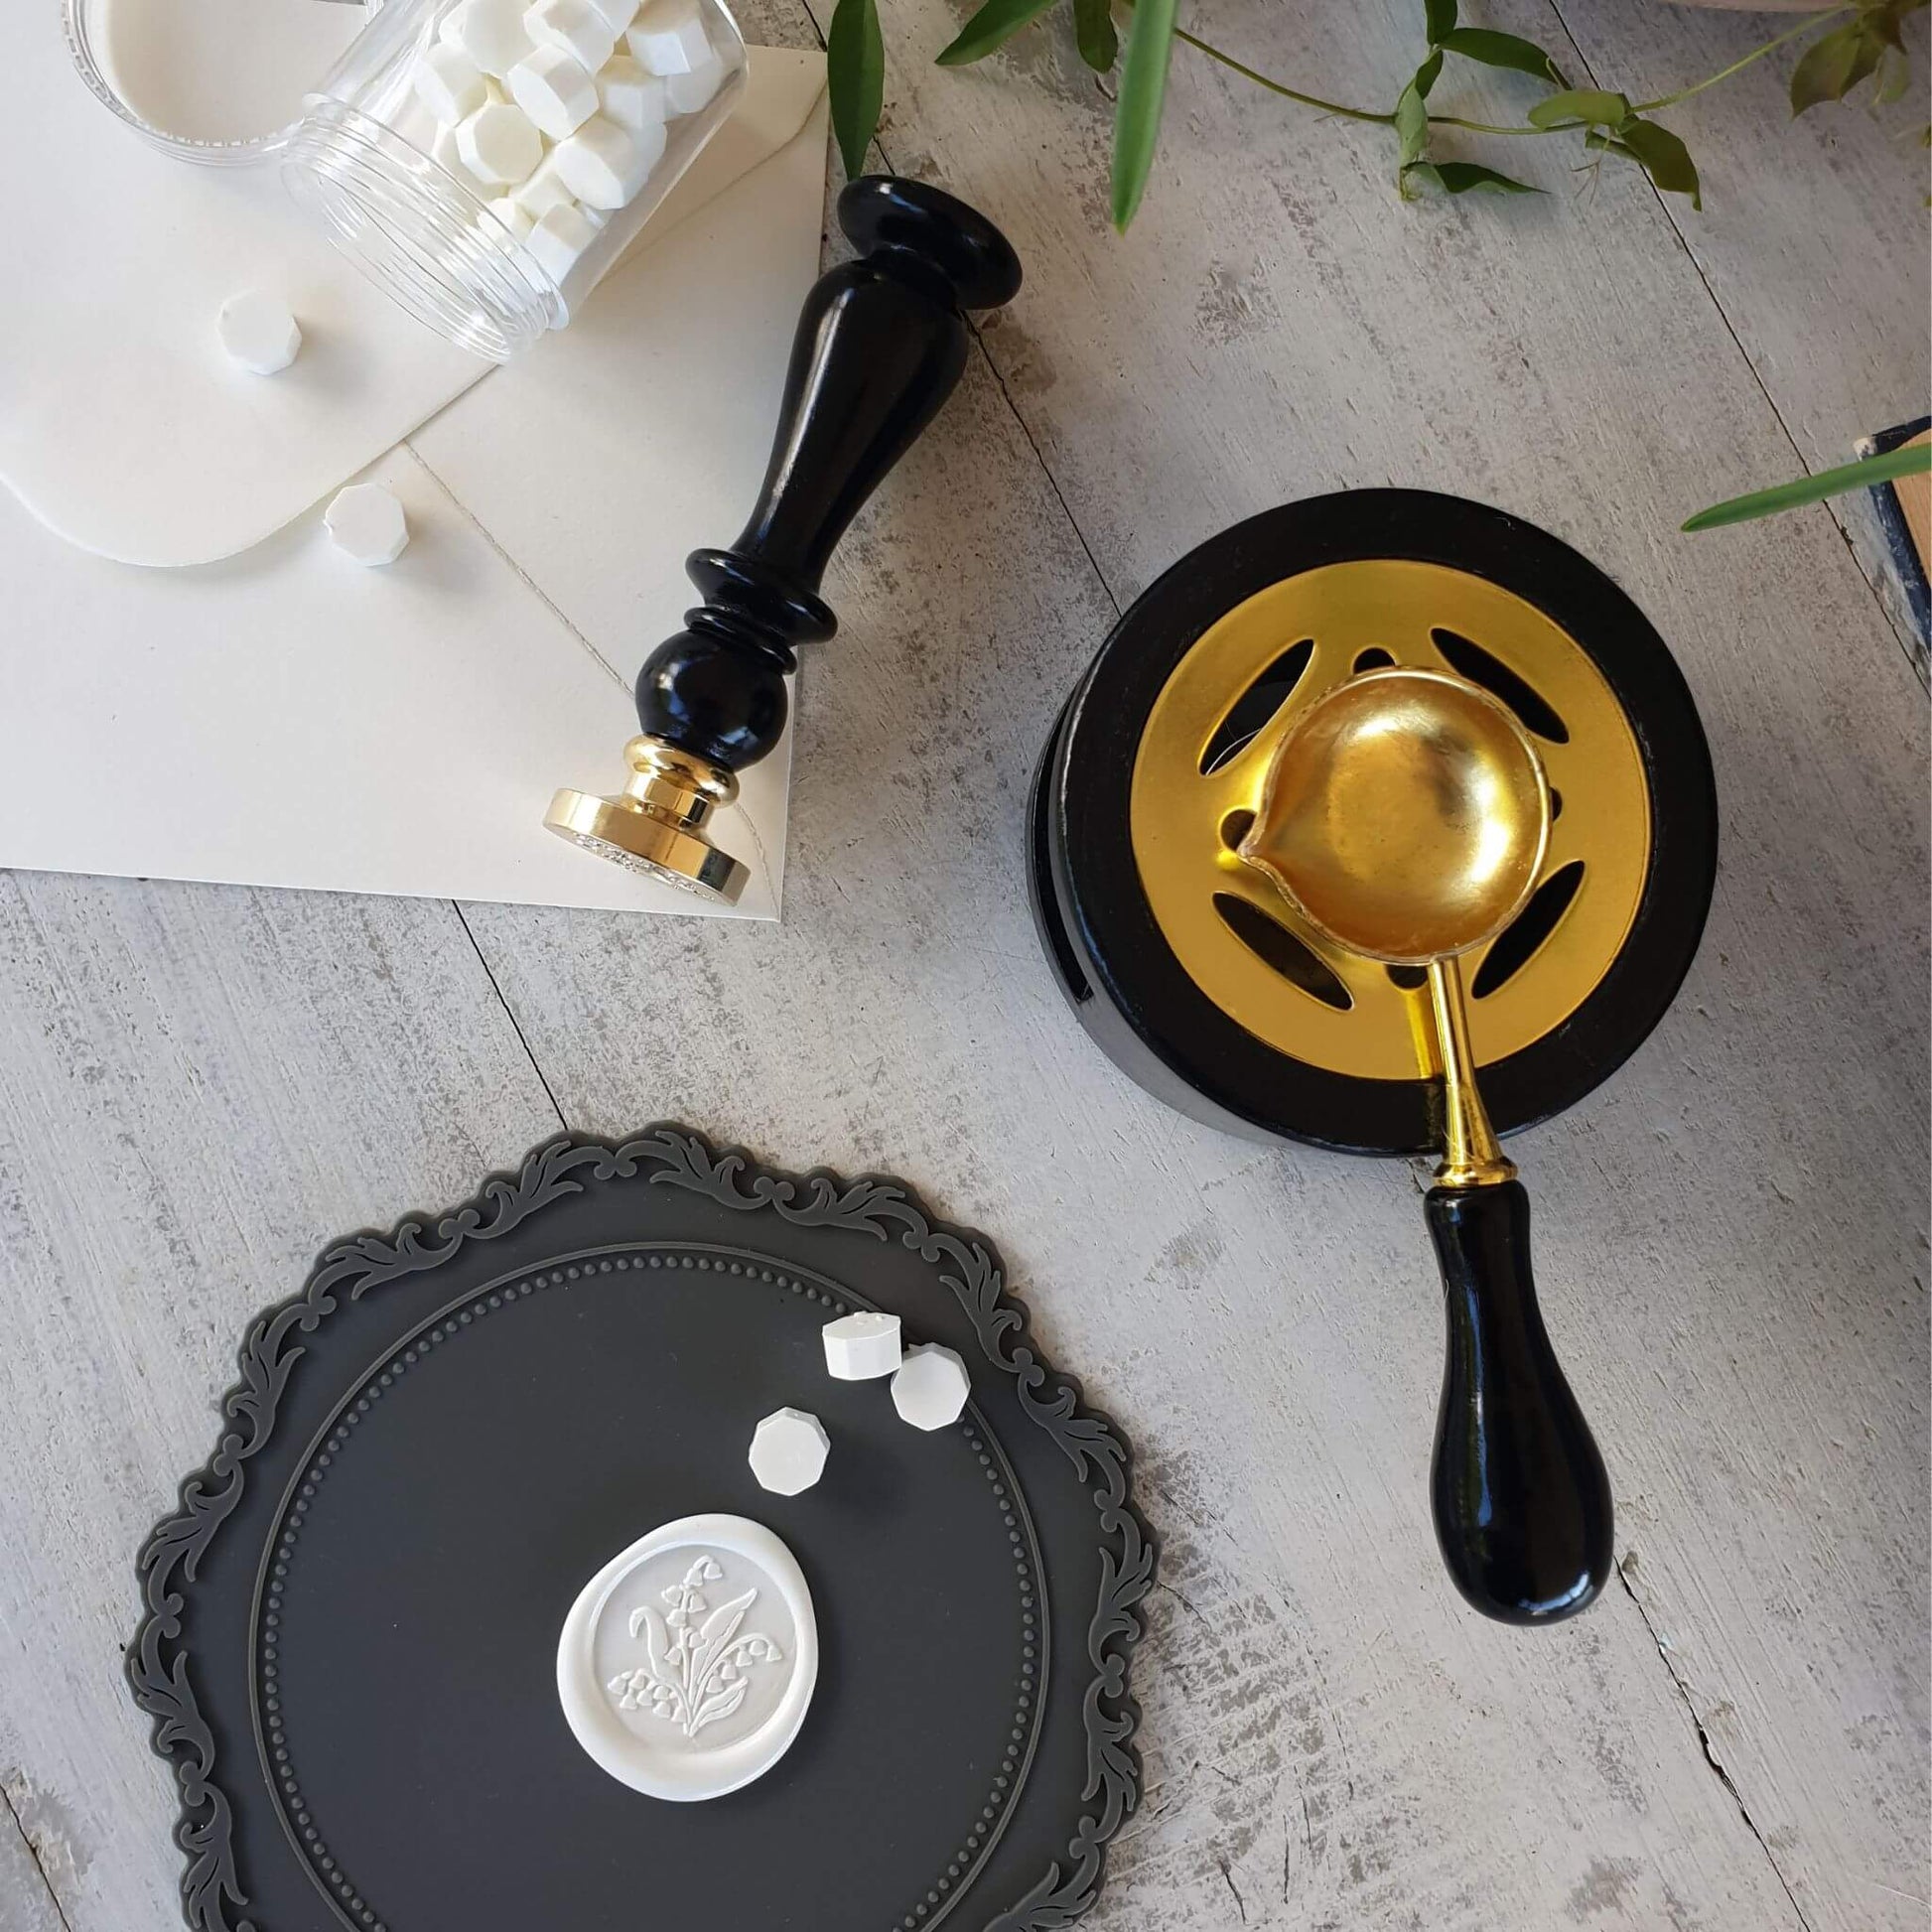 flatlay of black and gold wax melter stove in use on table with wax seal stamp, white floral wax seal, white wax sealing beads and grey silicone wax sealing mat